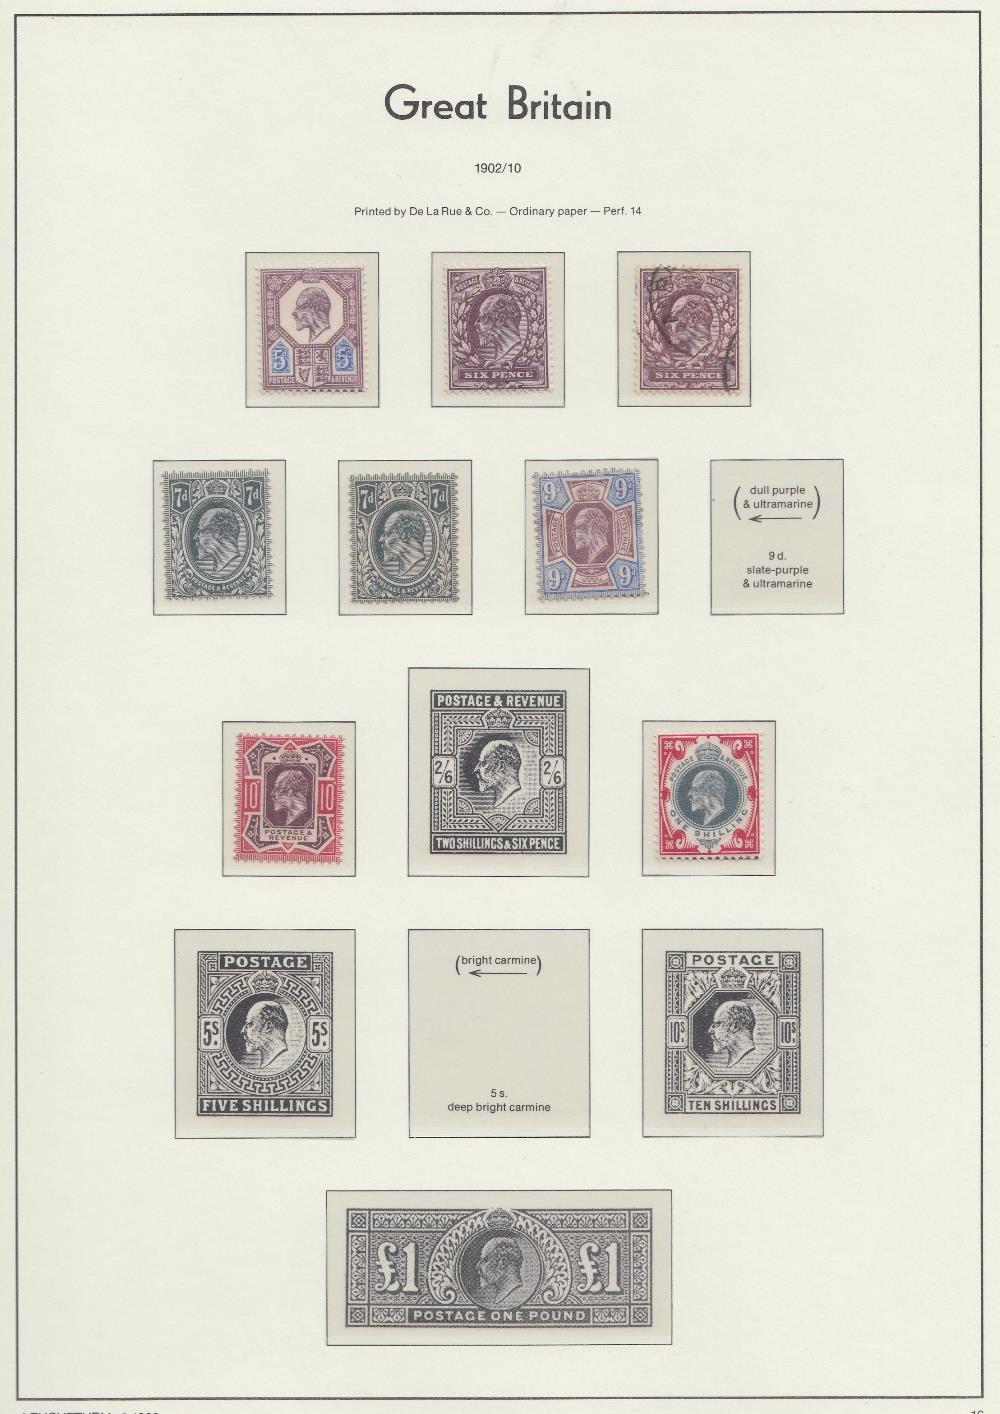 STAMPS GREAT BRITAIN 1840 - 1970 mint and used collection in Lighthouse slipcase album. - Image 4 of 4